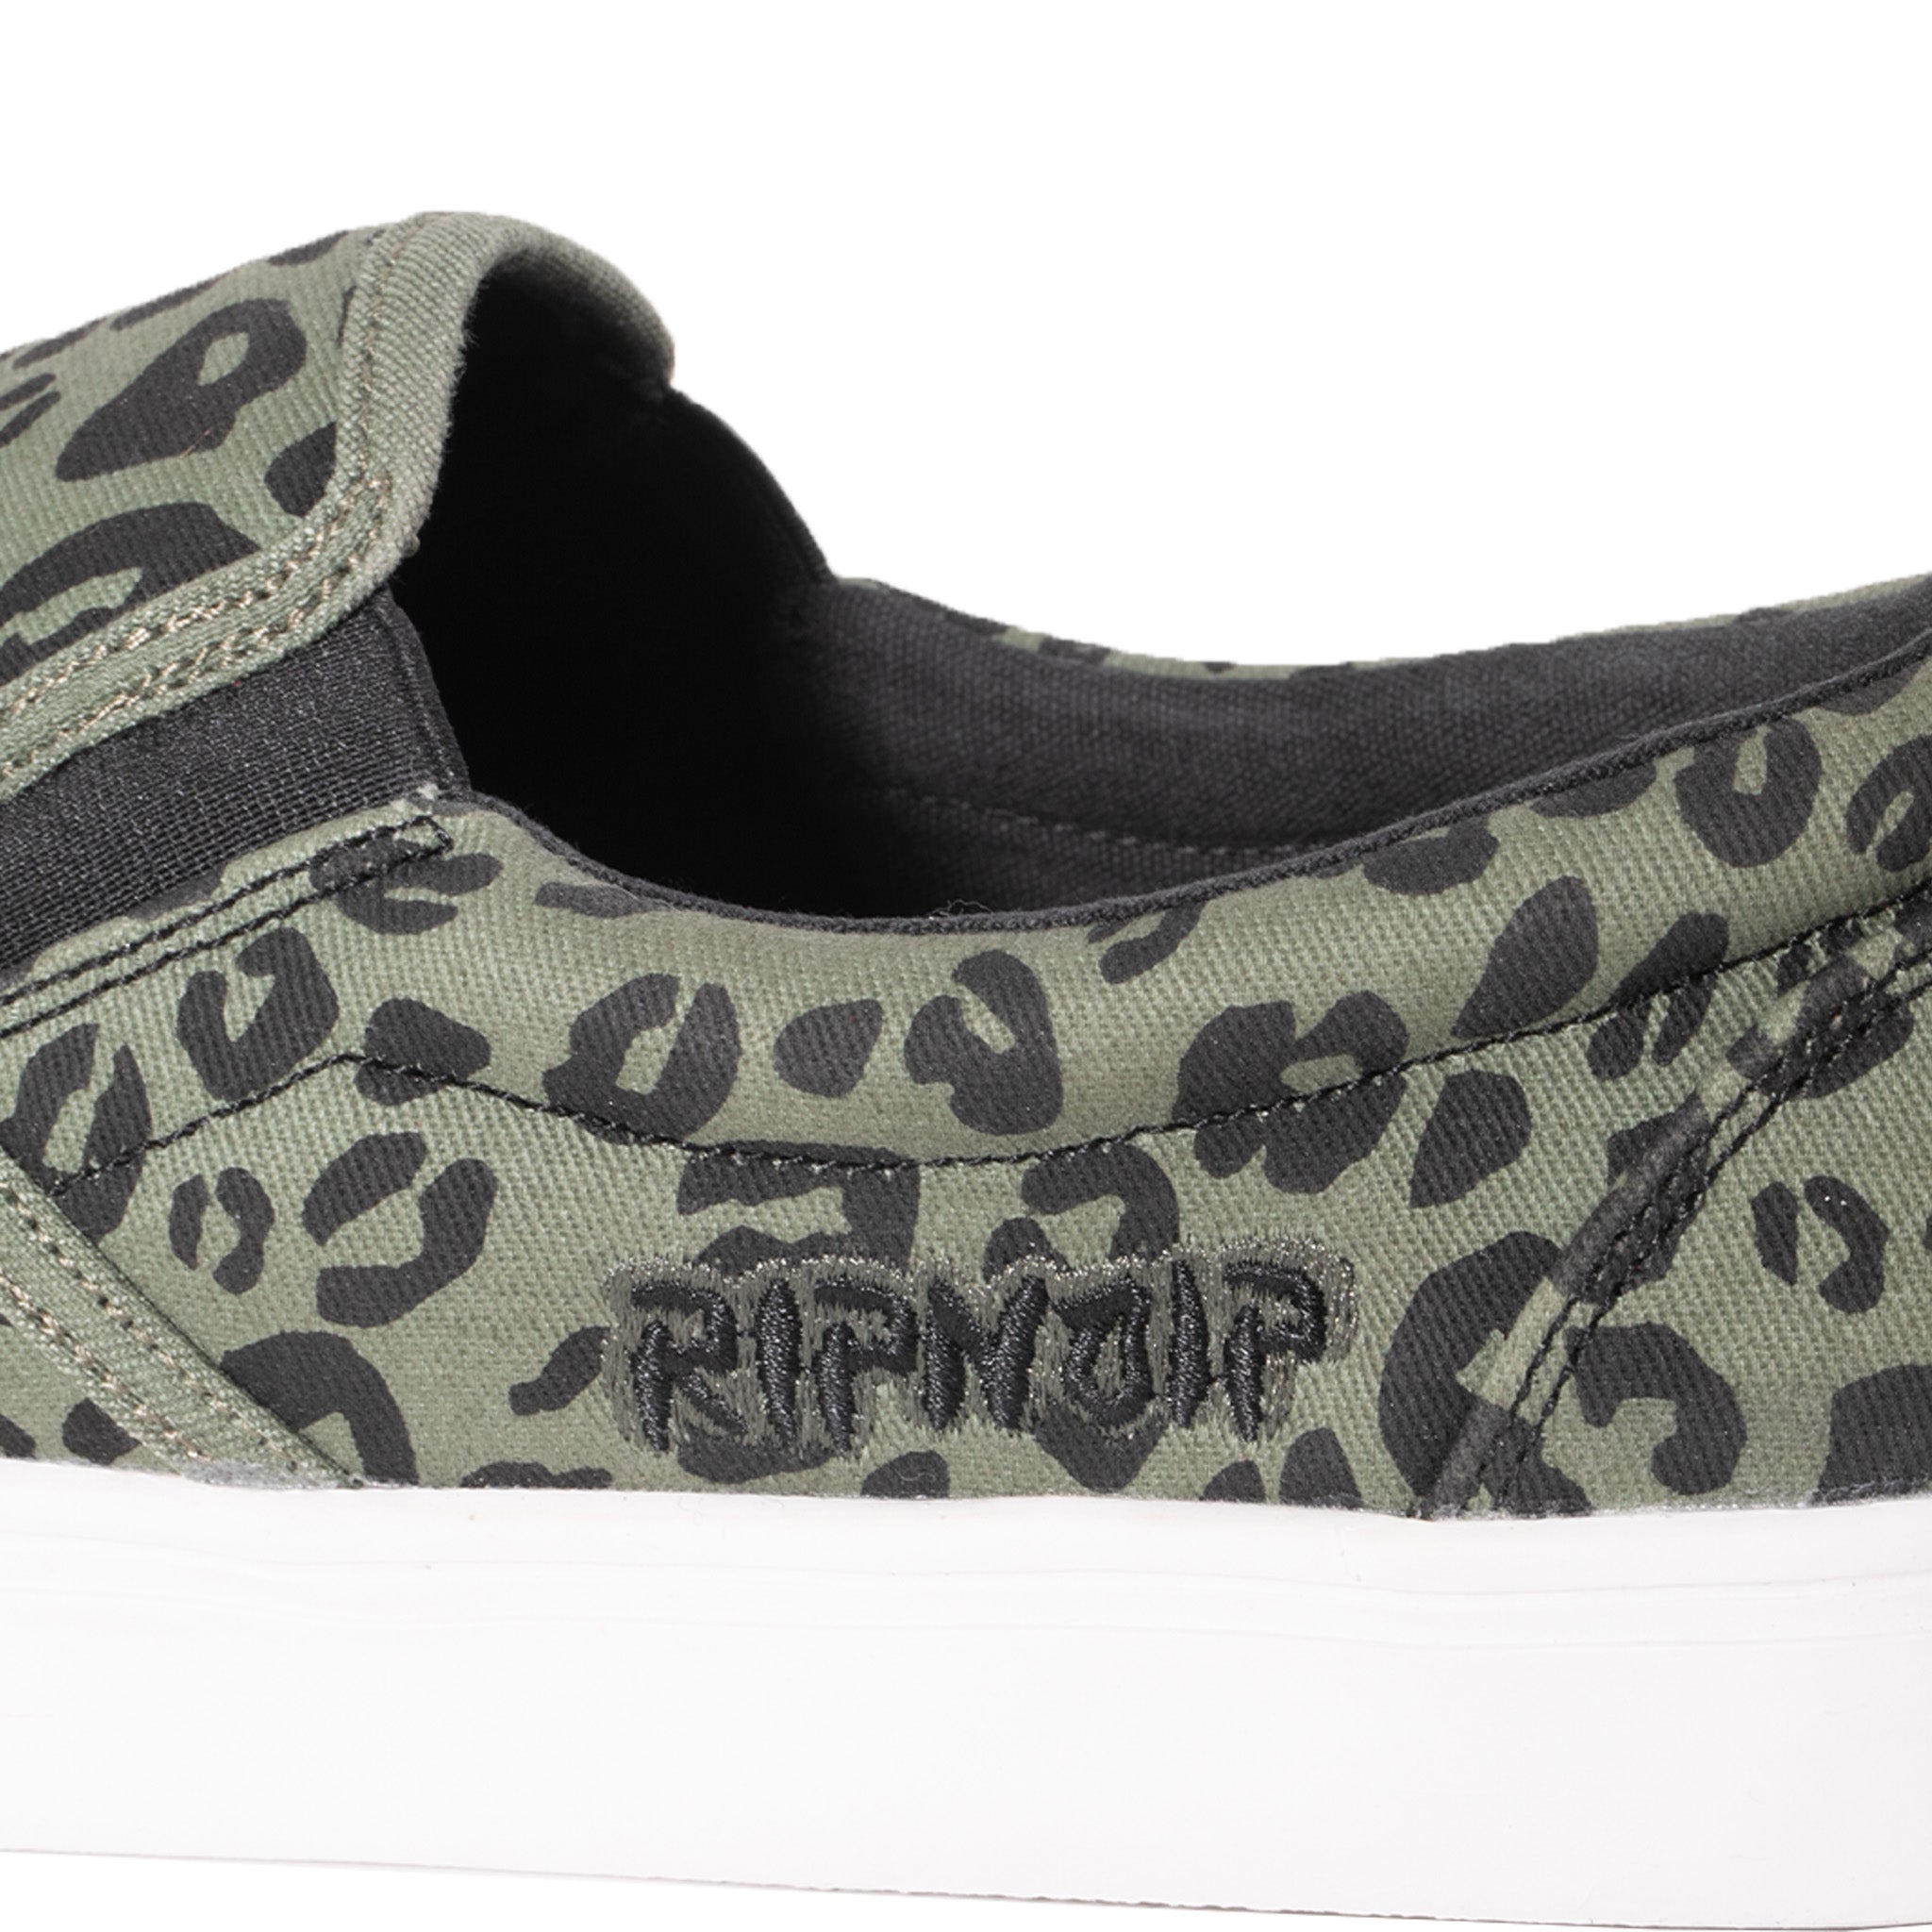 RIPNDIP Spotted Slip On Shoes